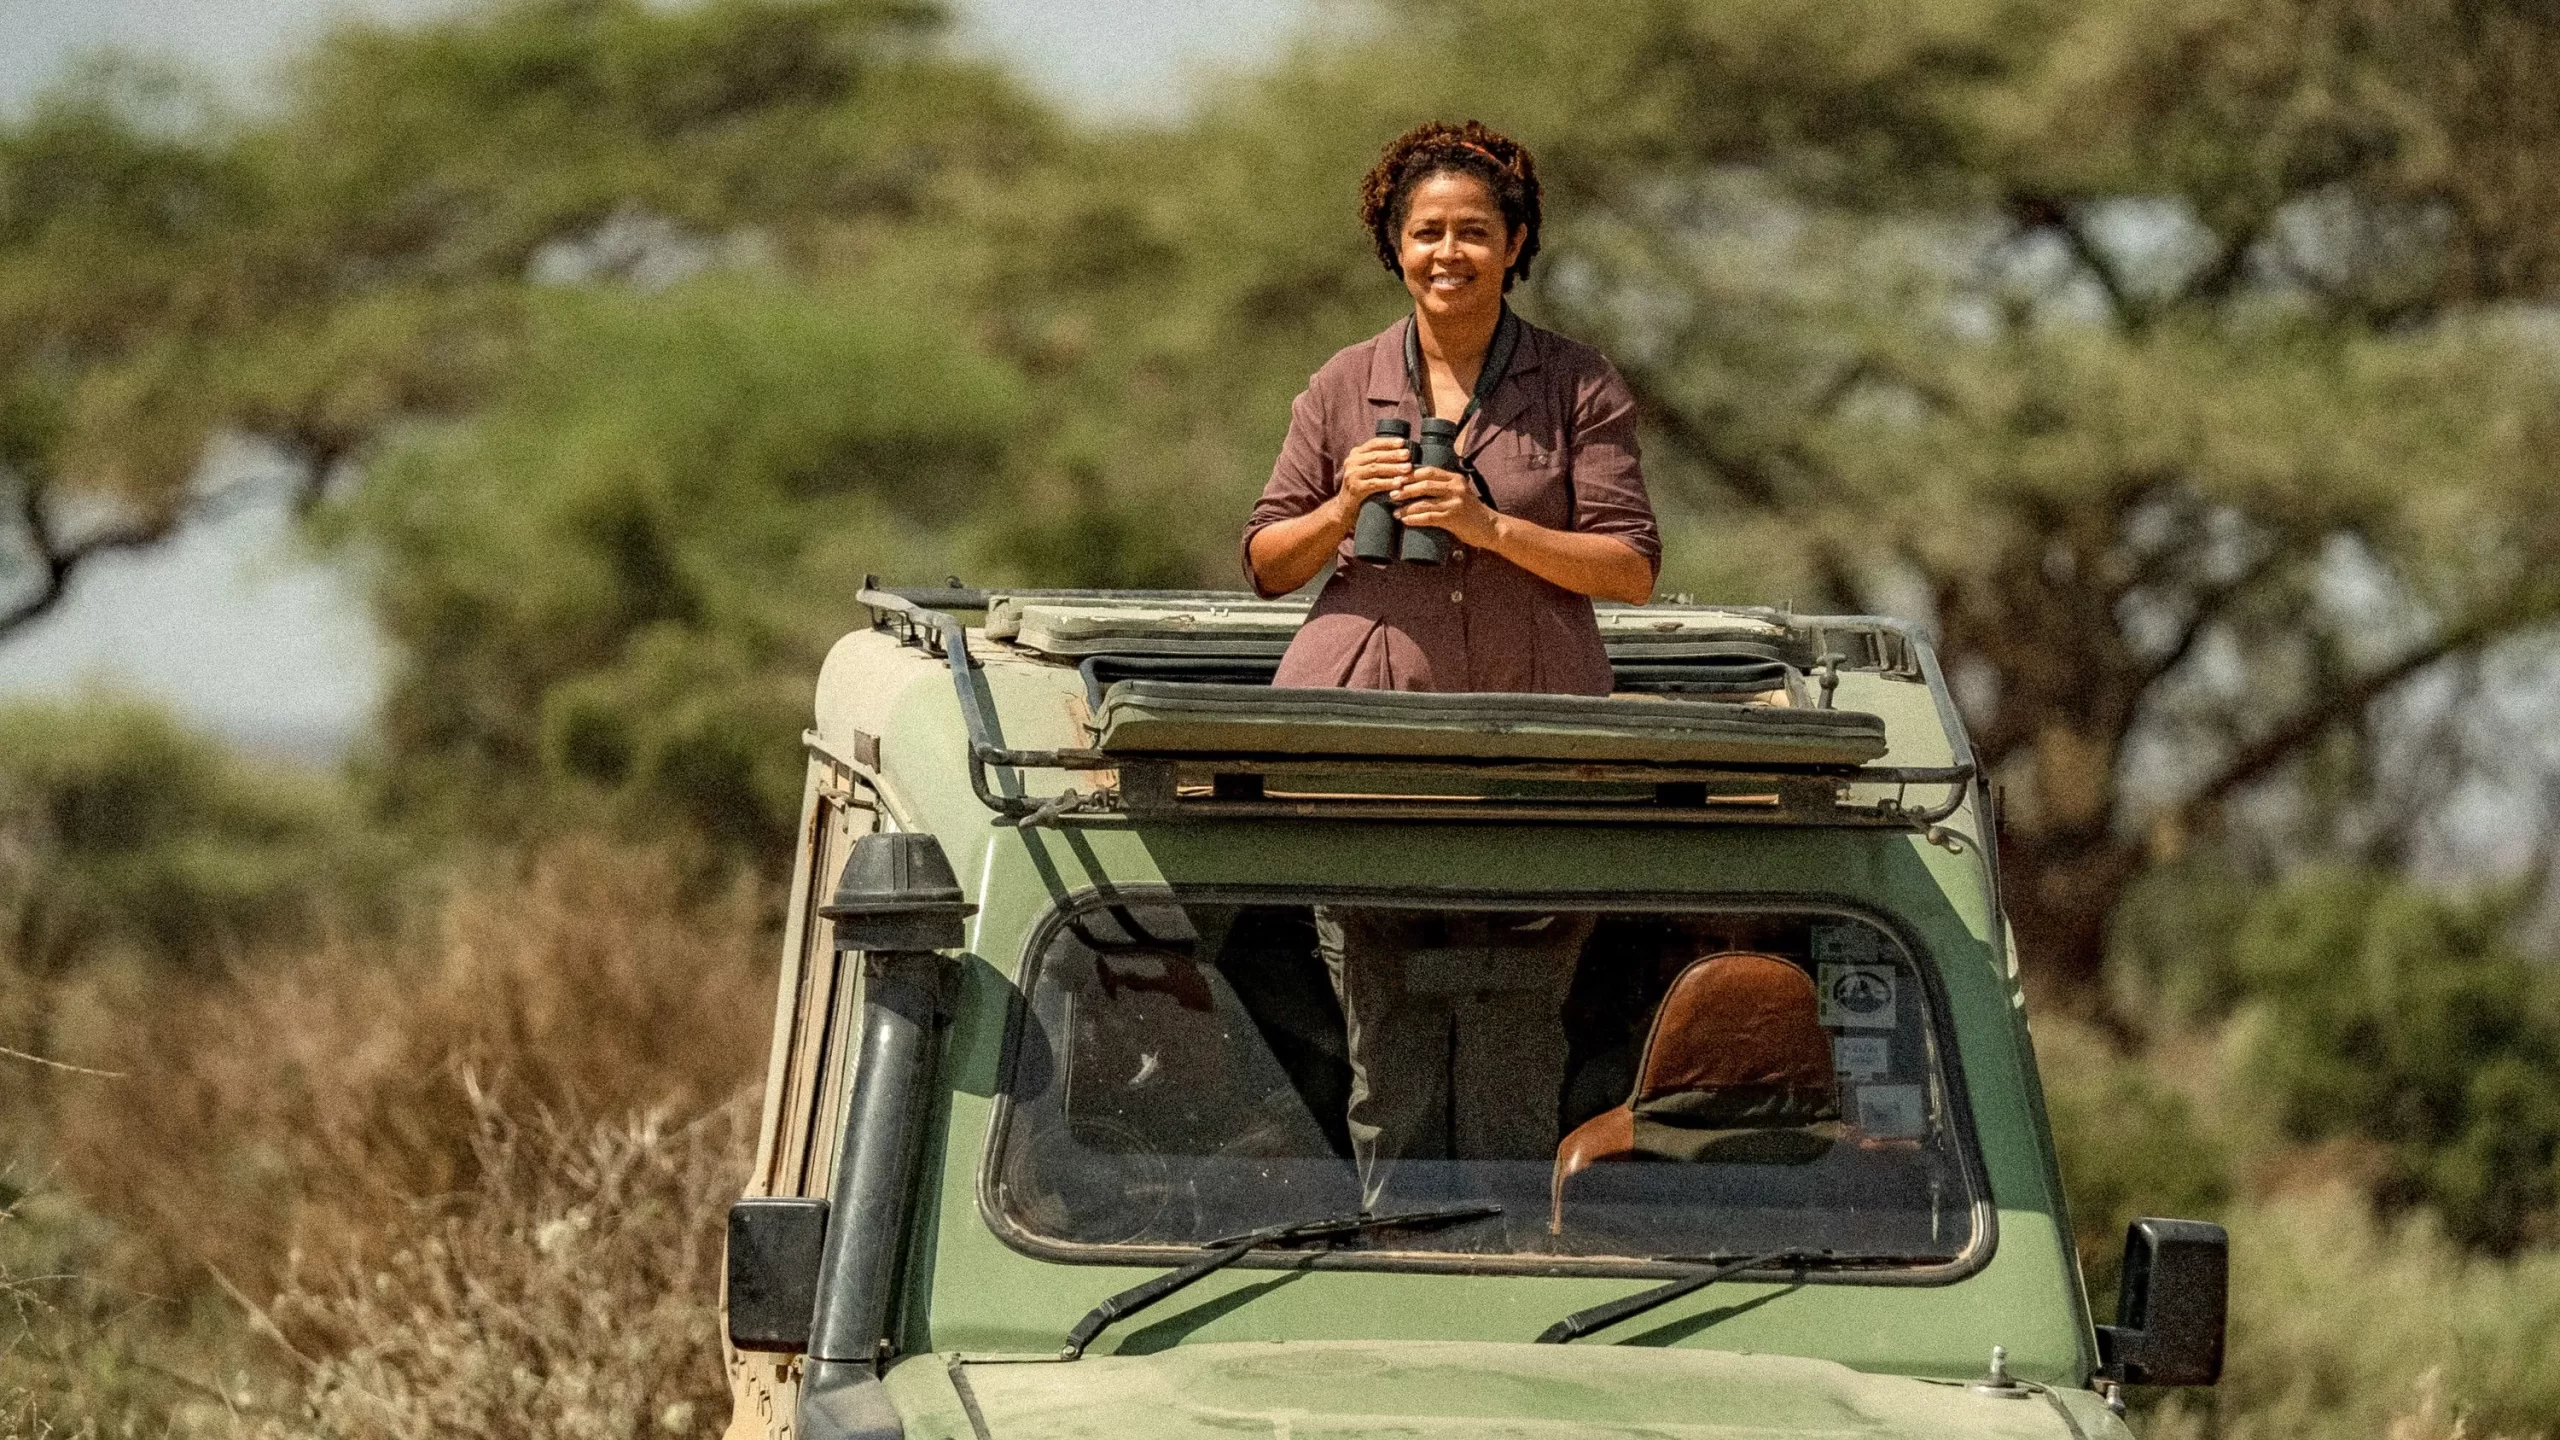 Theyre Like the Best Parts of Humans: Dr. Paula Kahumbu on Elephant Culture, Conservation Efforts, and The Secrets of Elephants